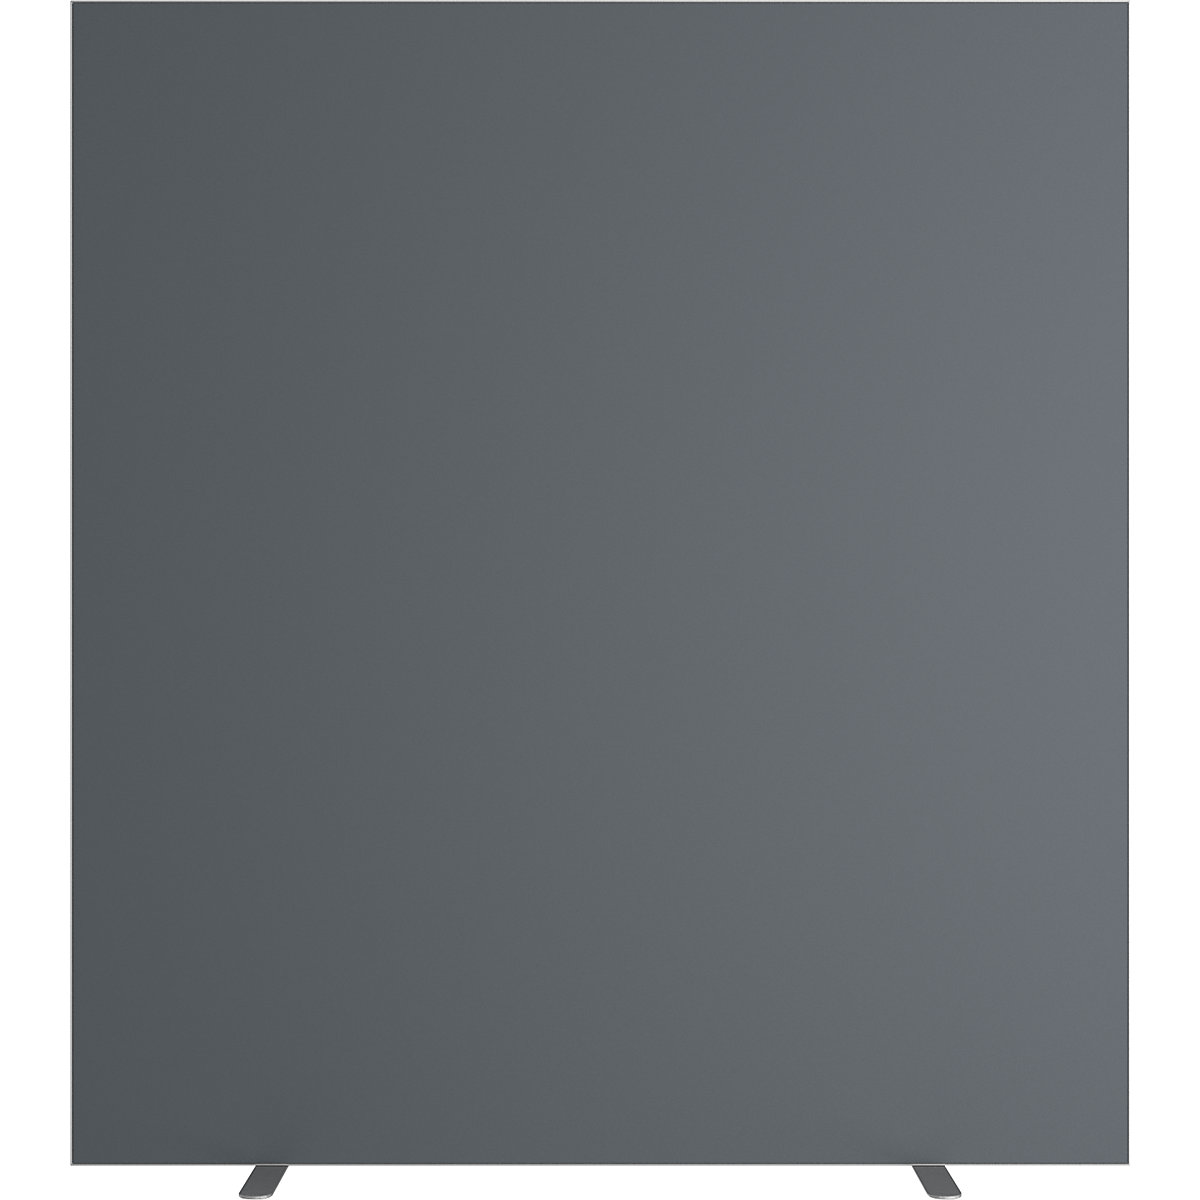 easyScreen partition, single colour, charcoal, width 1600 mm-13